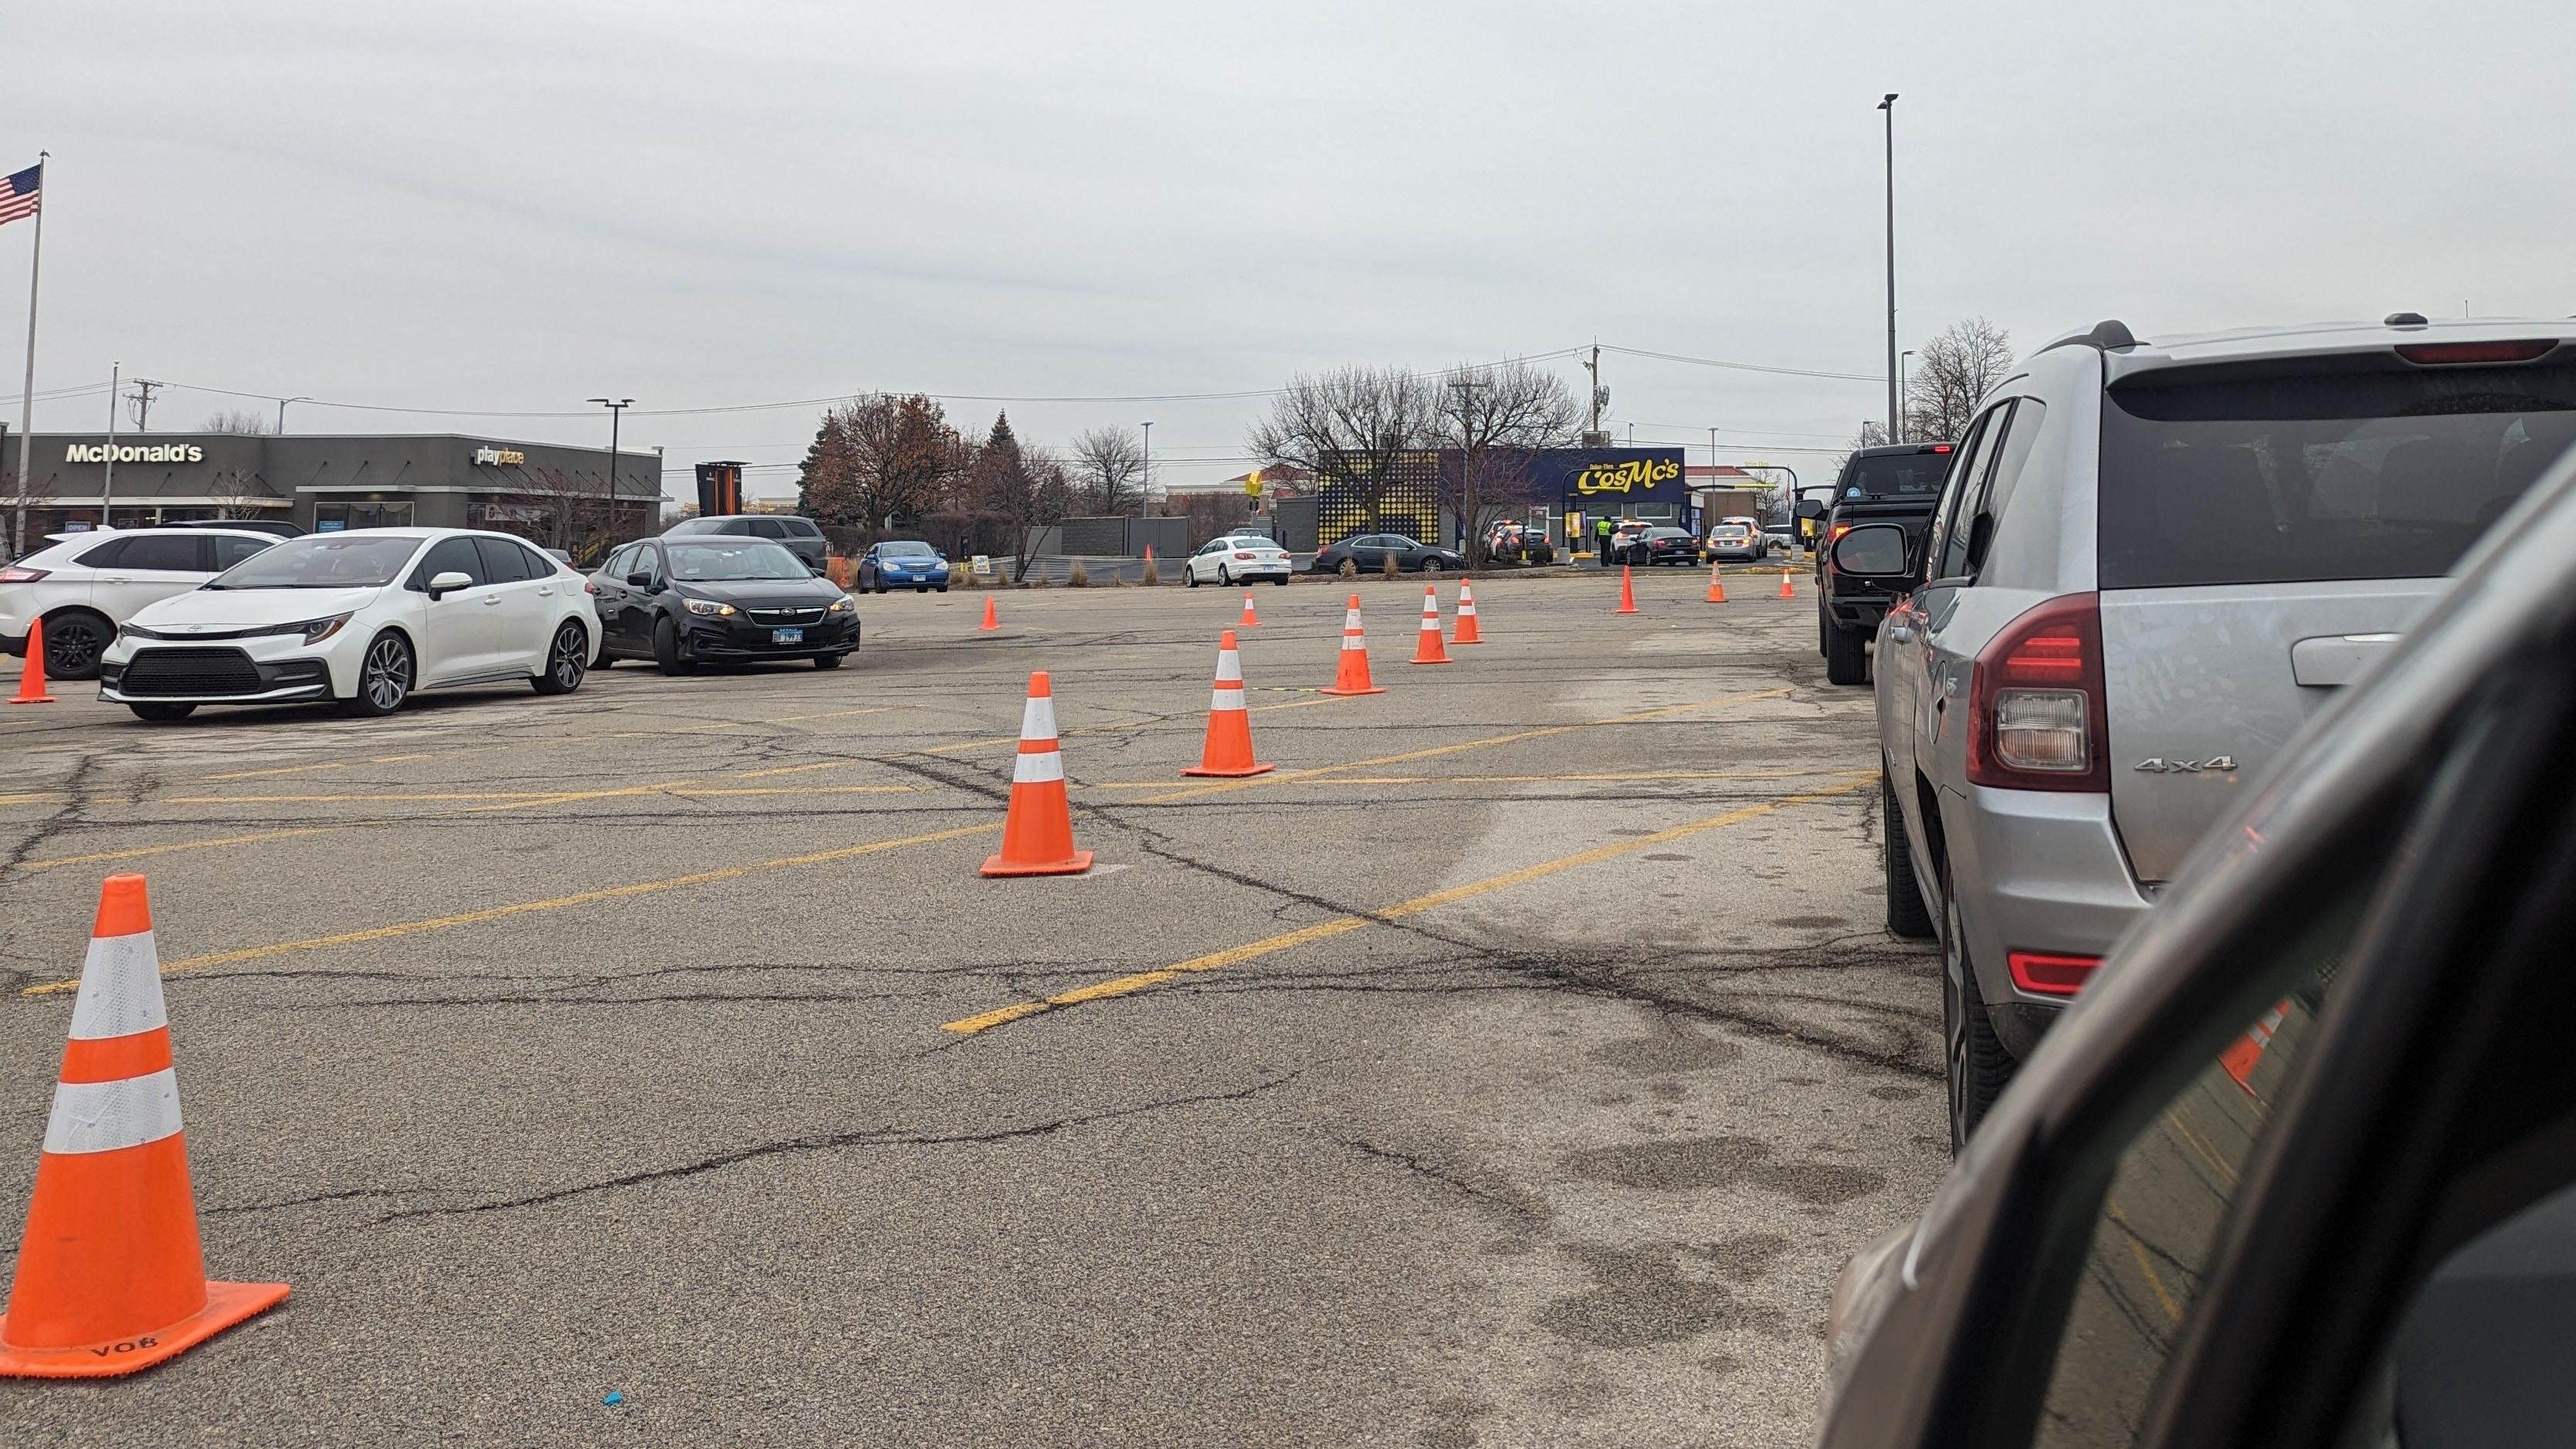 Parking lot with traffic cones and cars outside McDonald's and CosMc's